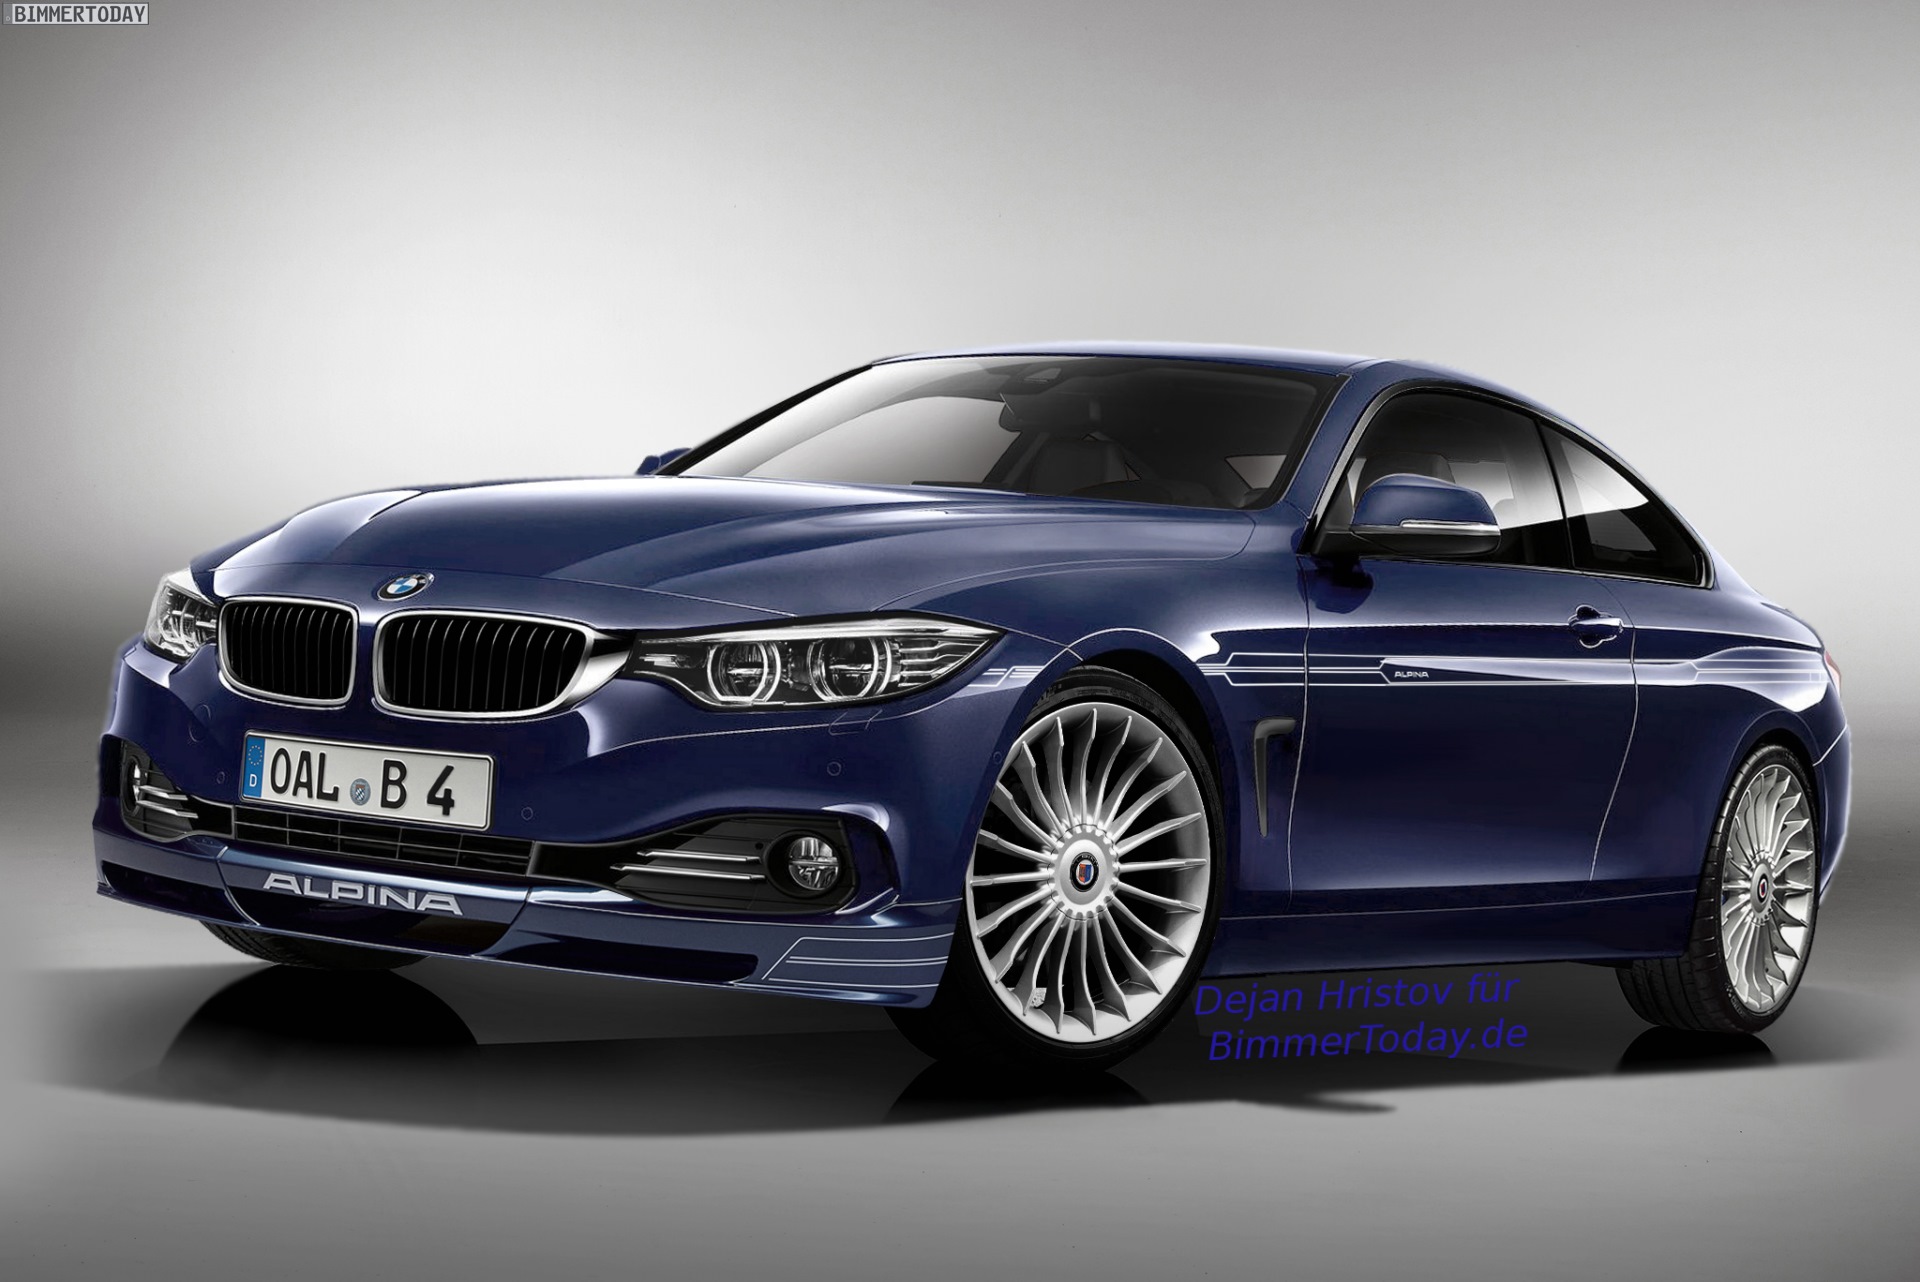 2014 BMW Alpina B4 Backgrounds on Wallpapers Vista